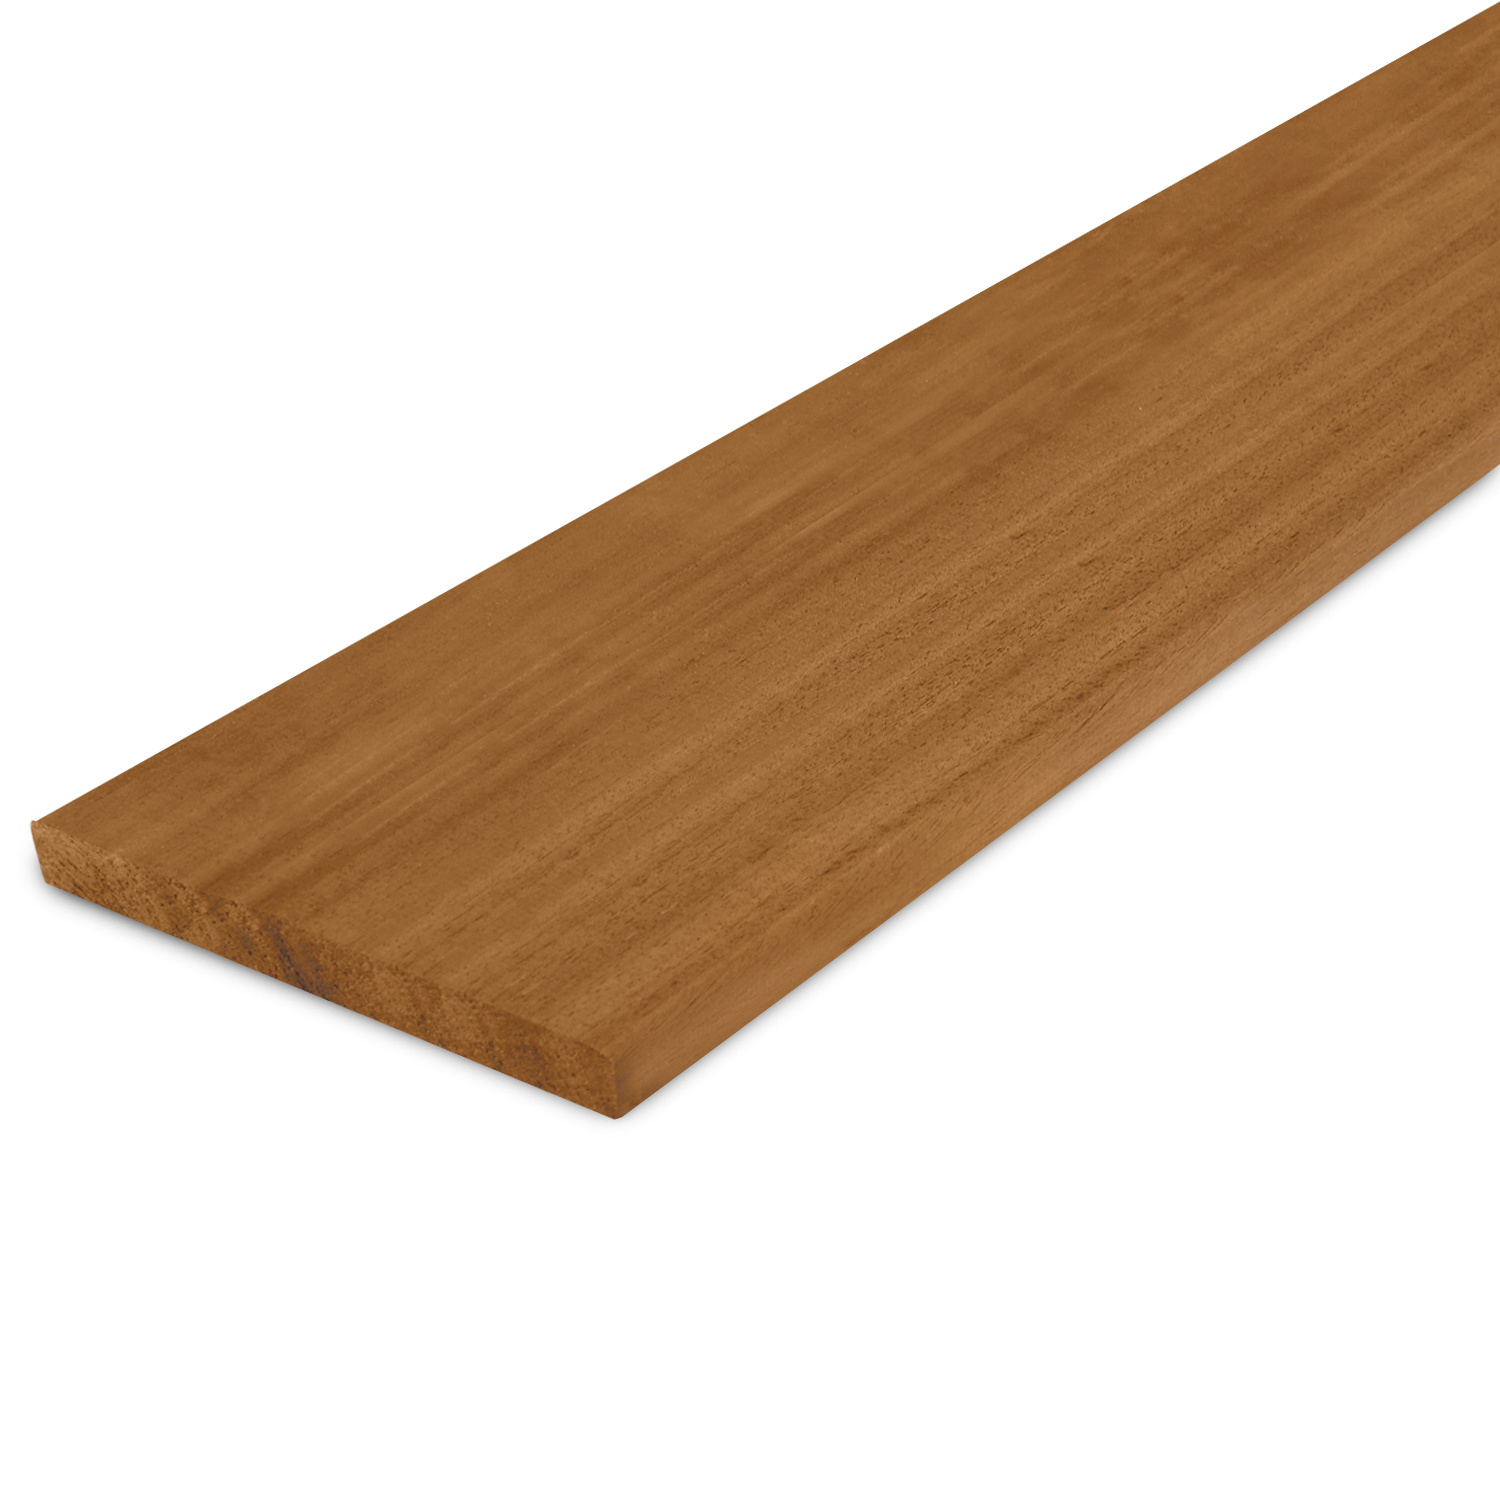  Thermowood ayous plank 21x143mm - geschaafd - kunstmatig gedroogd (kd 8-12%) - thermisch gemodificeerd ayous hout (thermohout)